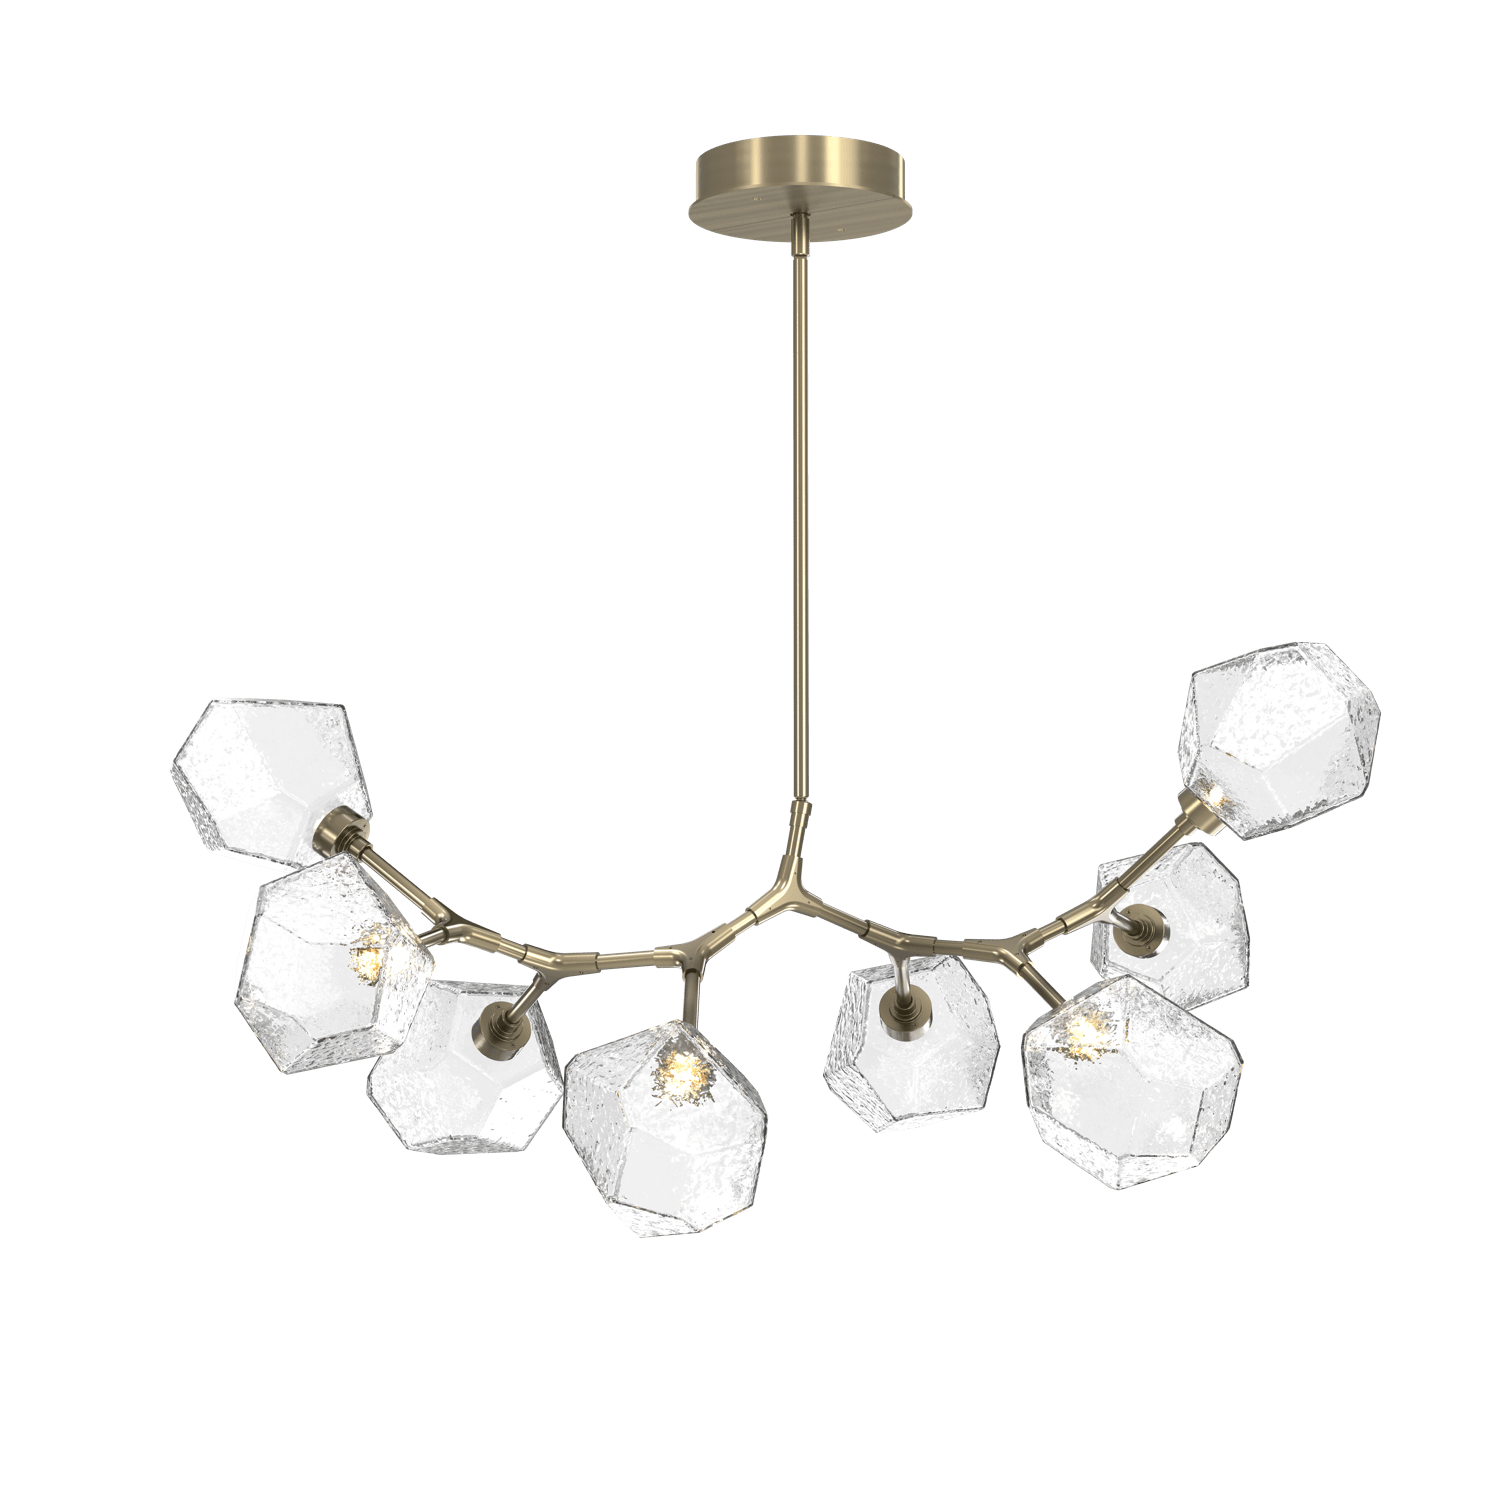 PLB0039-BB-HB-C-Hammerton-Studio-Gem-8-light-modern-branch-chandelier-with-heritage-brass-finish-and-clear-blown-glass-shades-and-LED-lamping